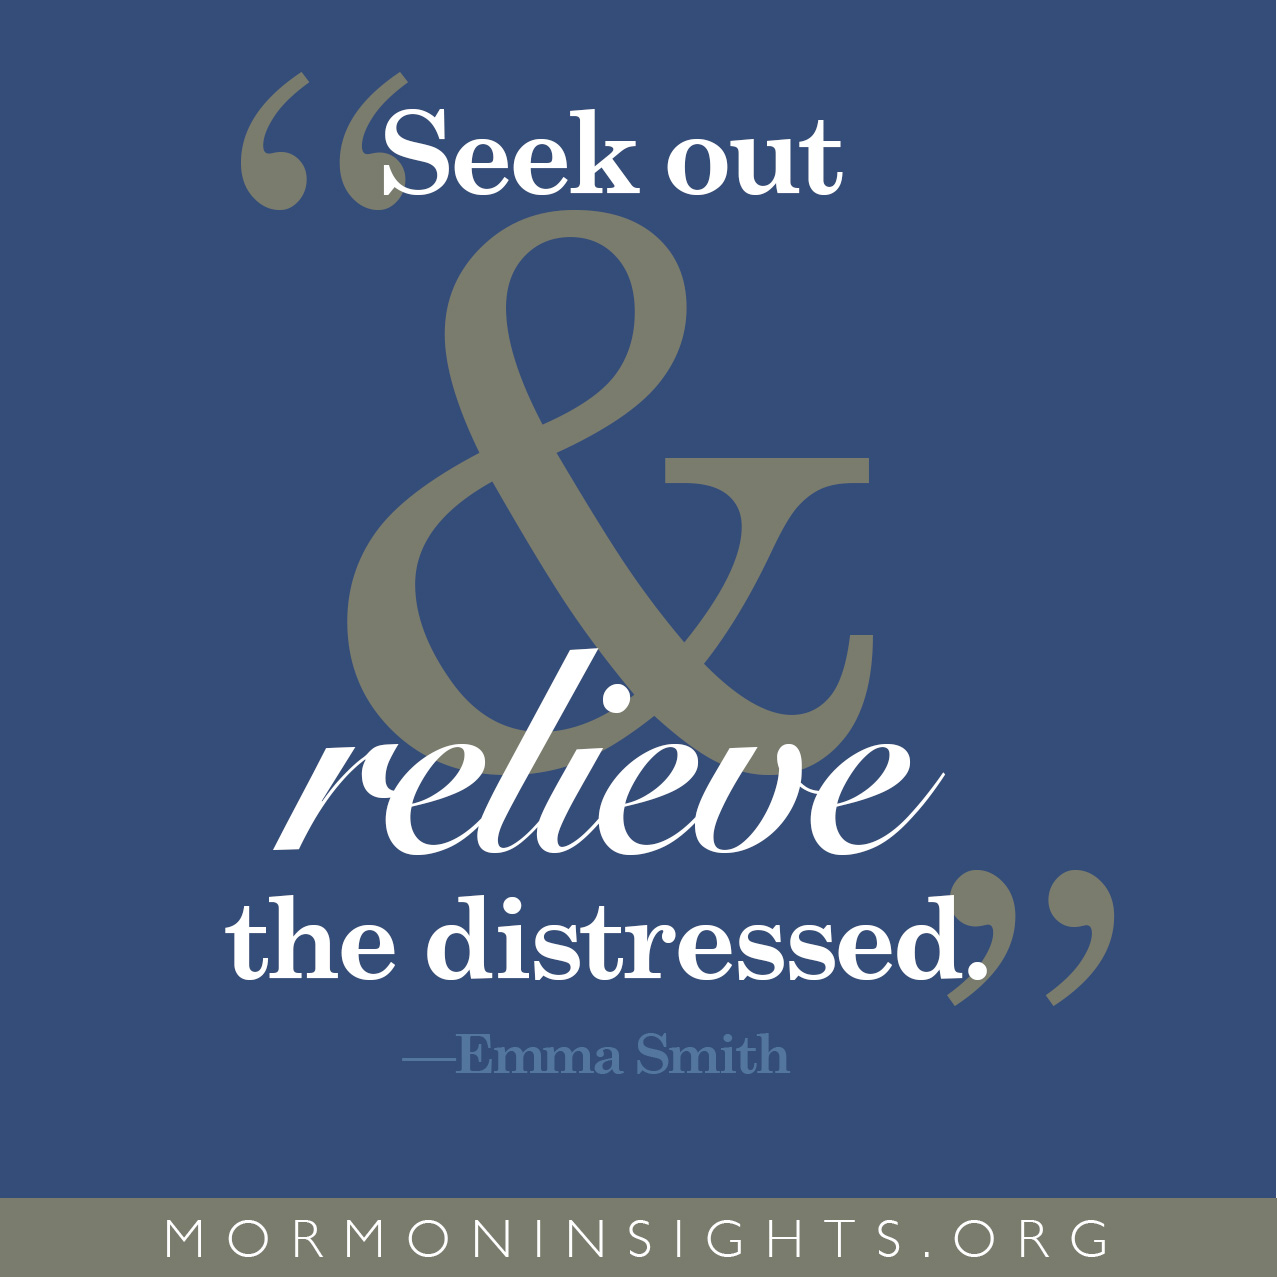 "Seek out & relieve the distressed." -Emma Smith